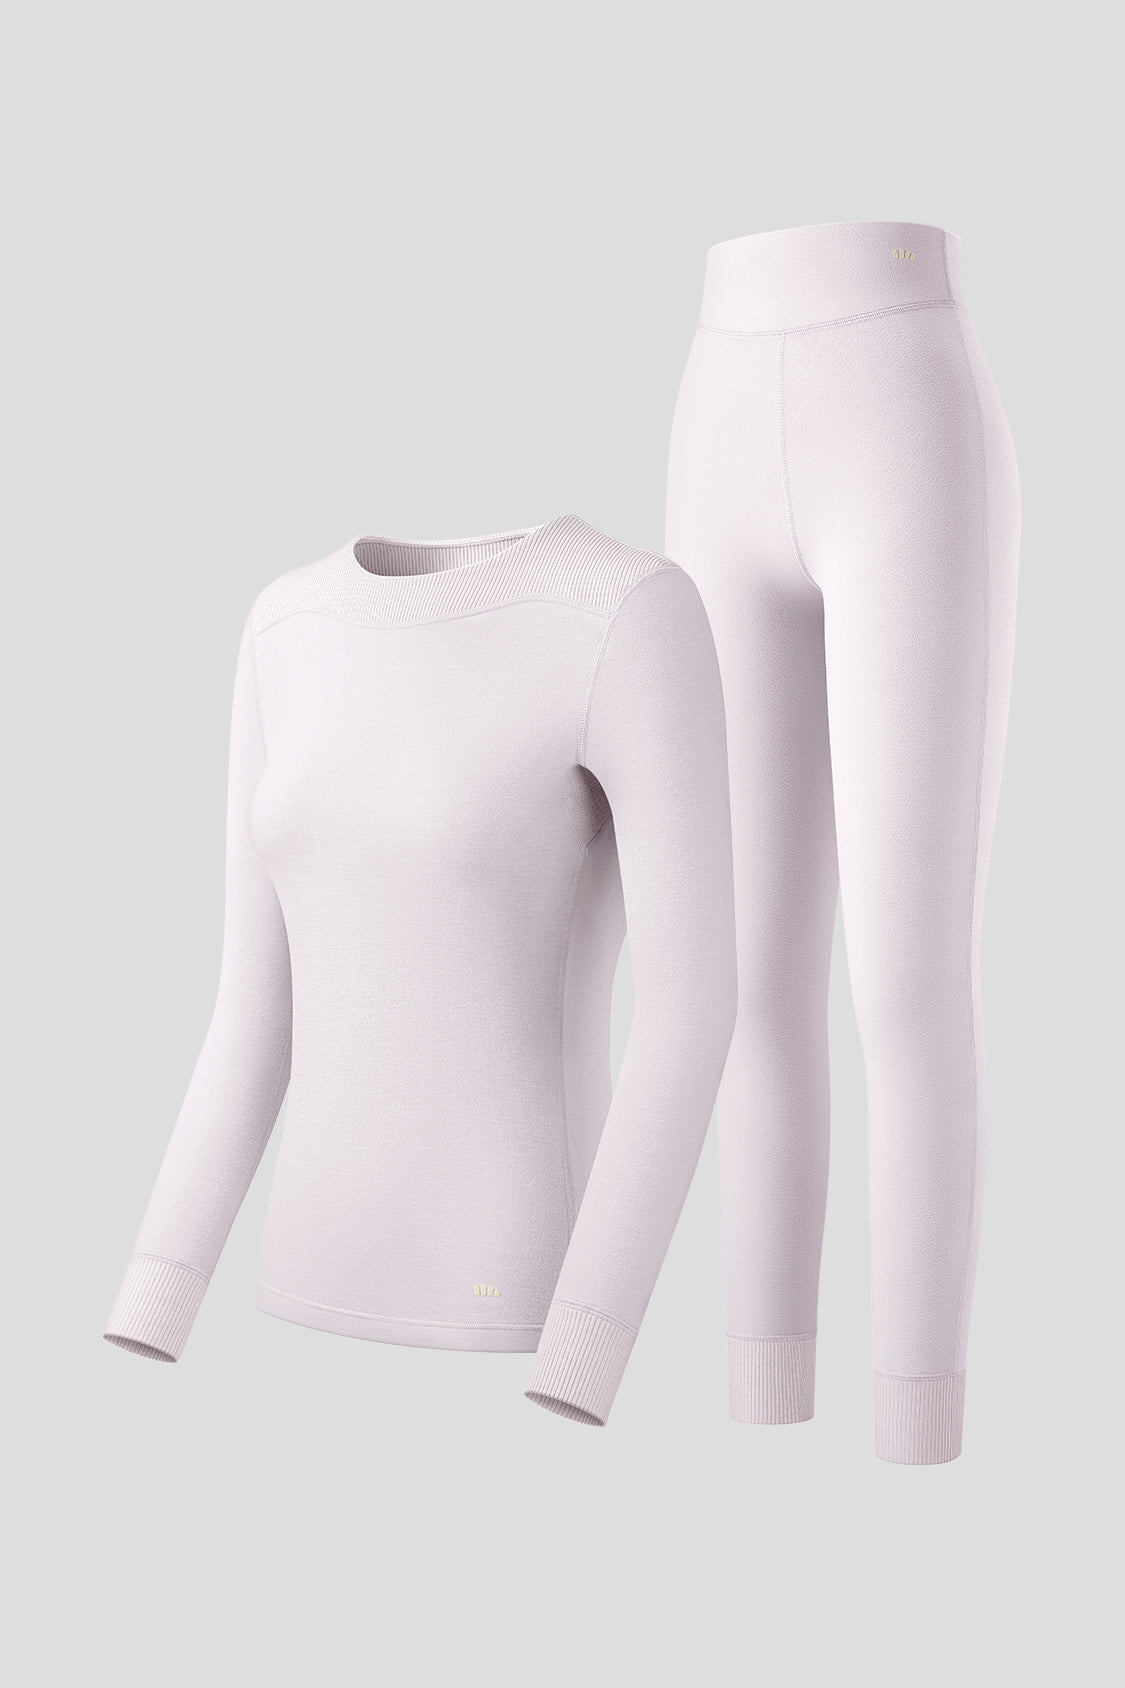  Thermal Underwear For Women, Winter Warm Base Layer  Compression Set Fleece Lined Long Johns, Complexion, X-Large